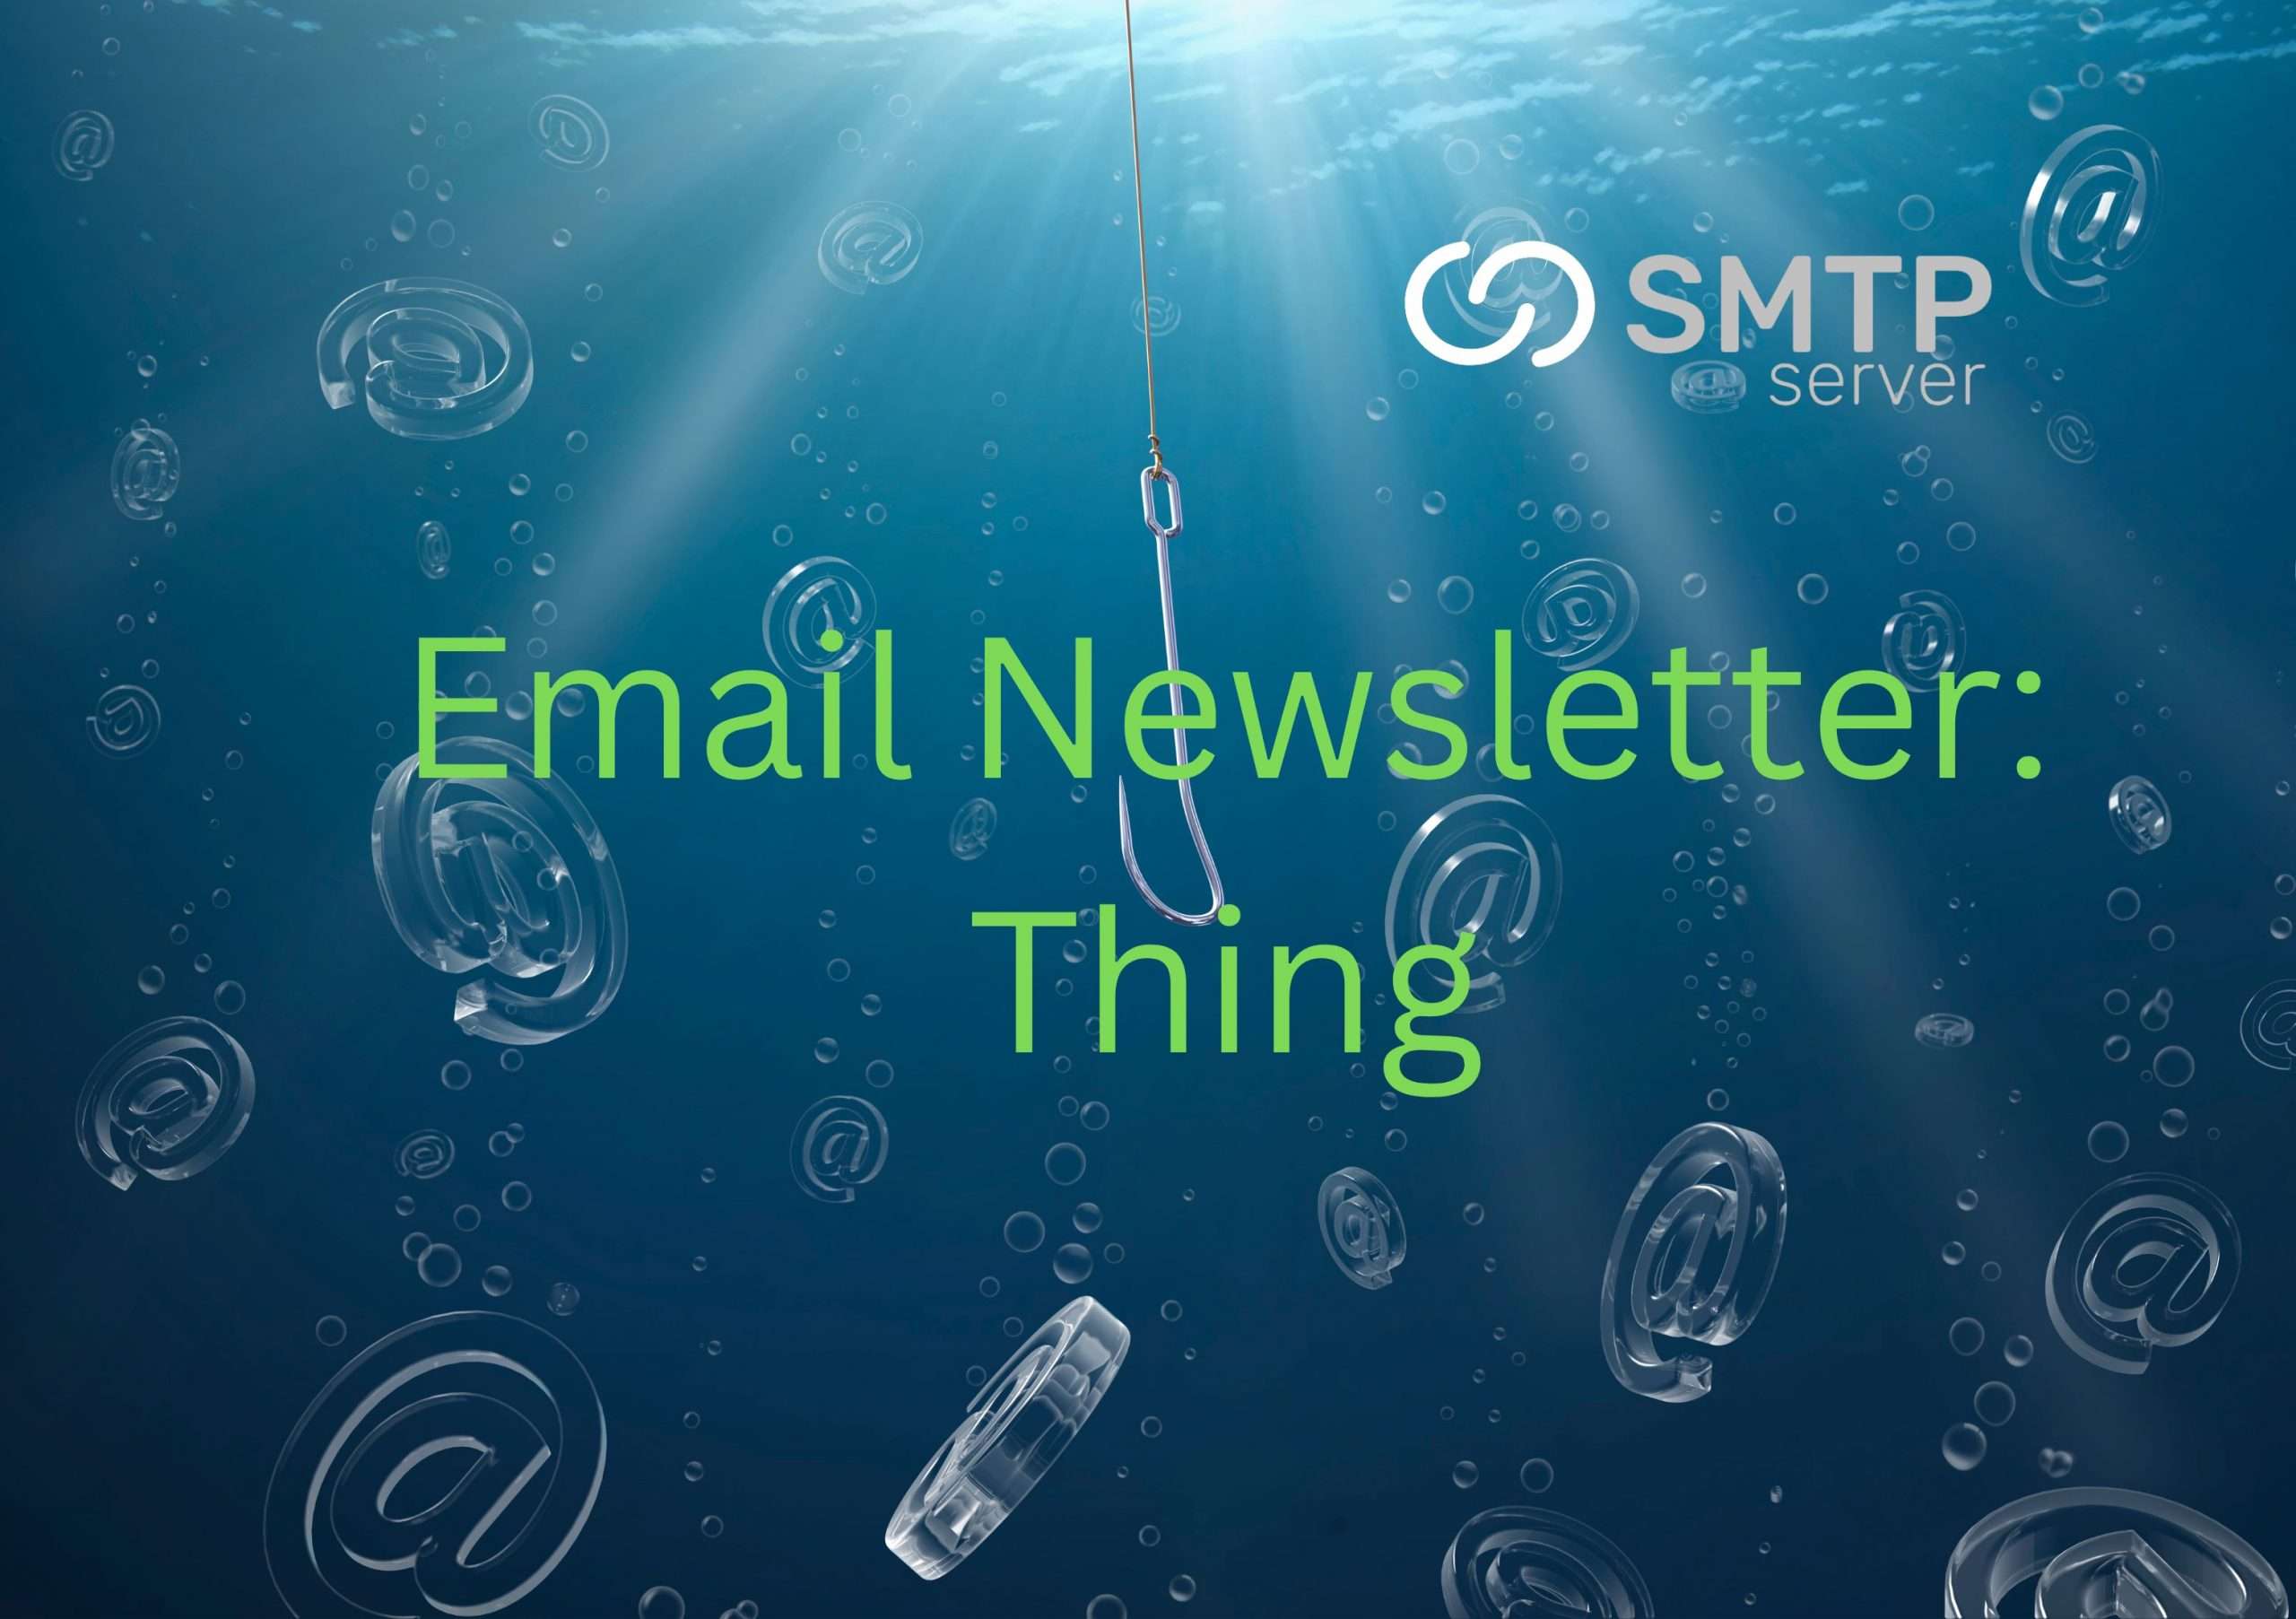 Make Your Email Newsletter a Thing